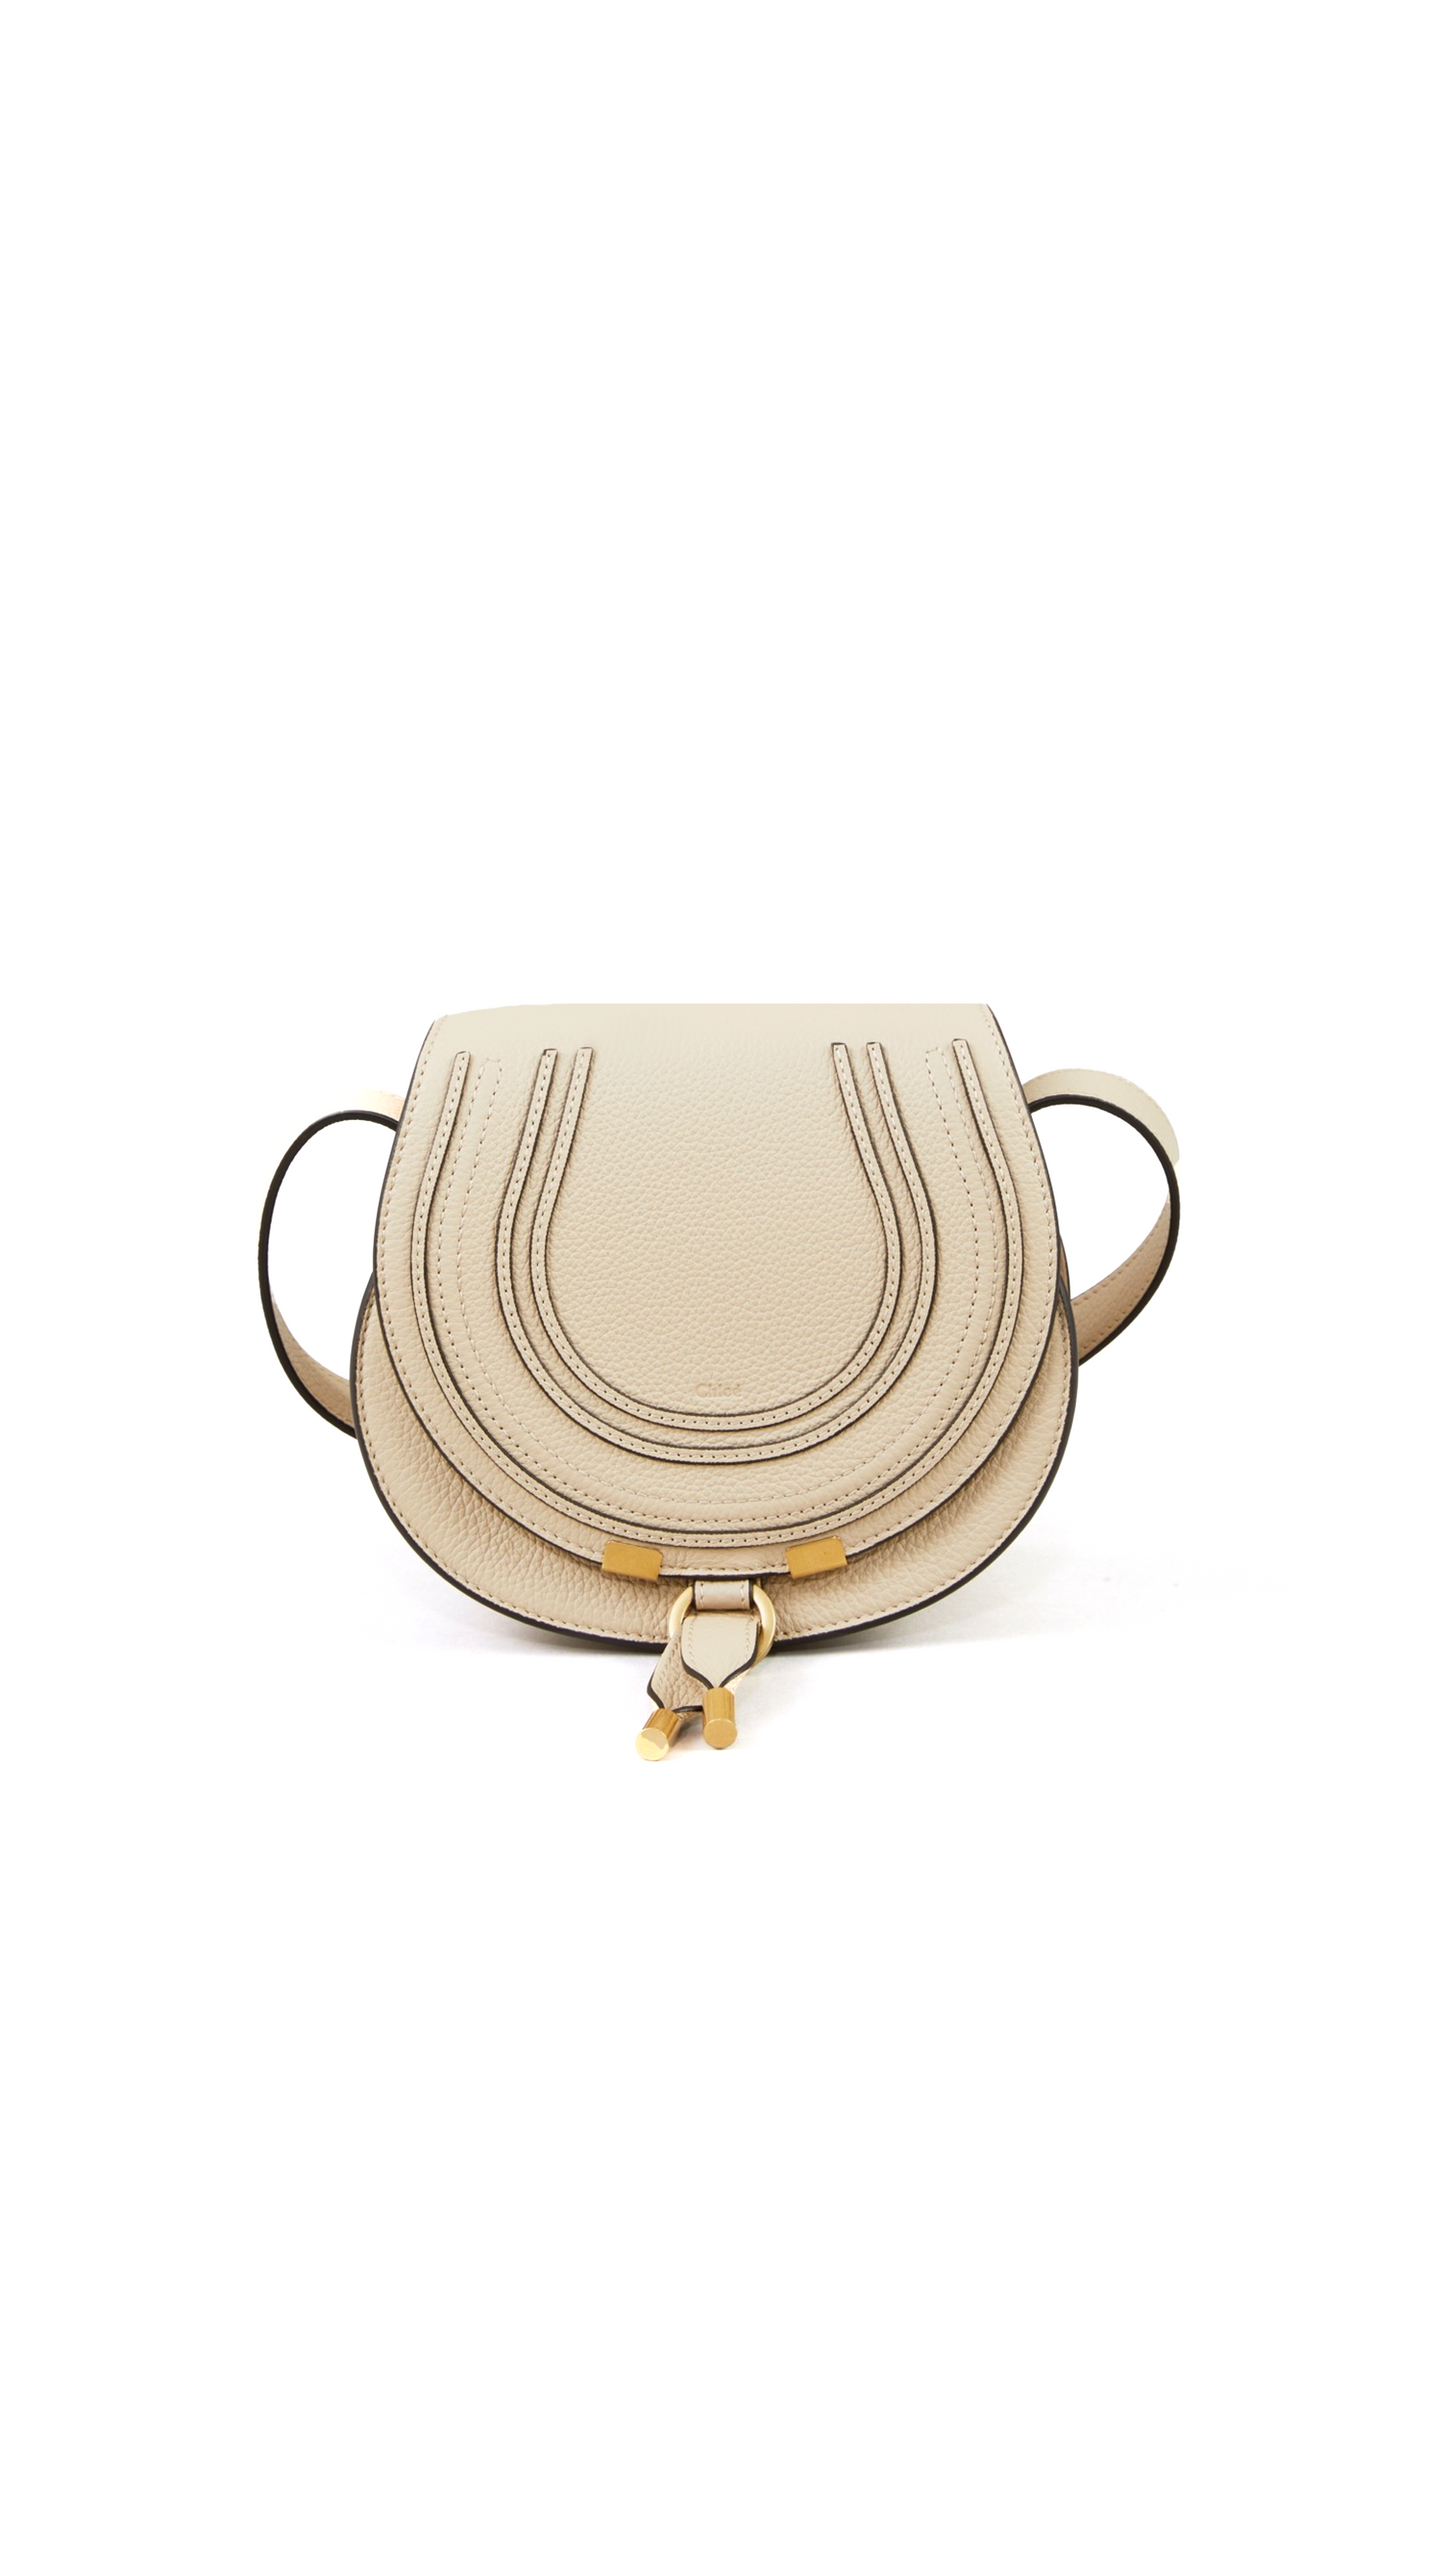 Marcie Small Saddle Bag - Root Beige